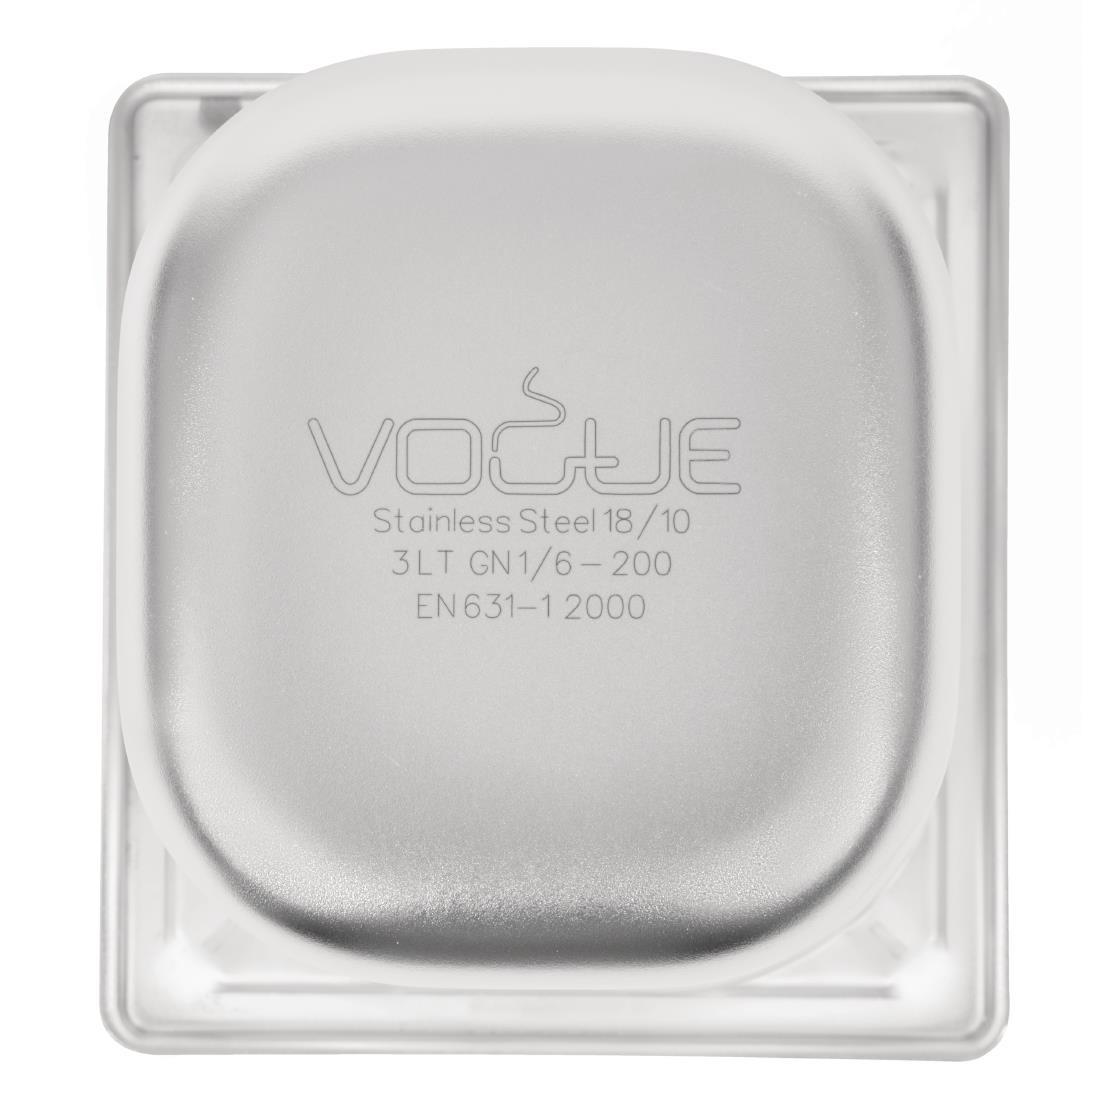 Vogue Heavy Duty Stainless Steel 1/6 Gastronorm Pan 200mm - DW452  - 6